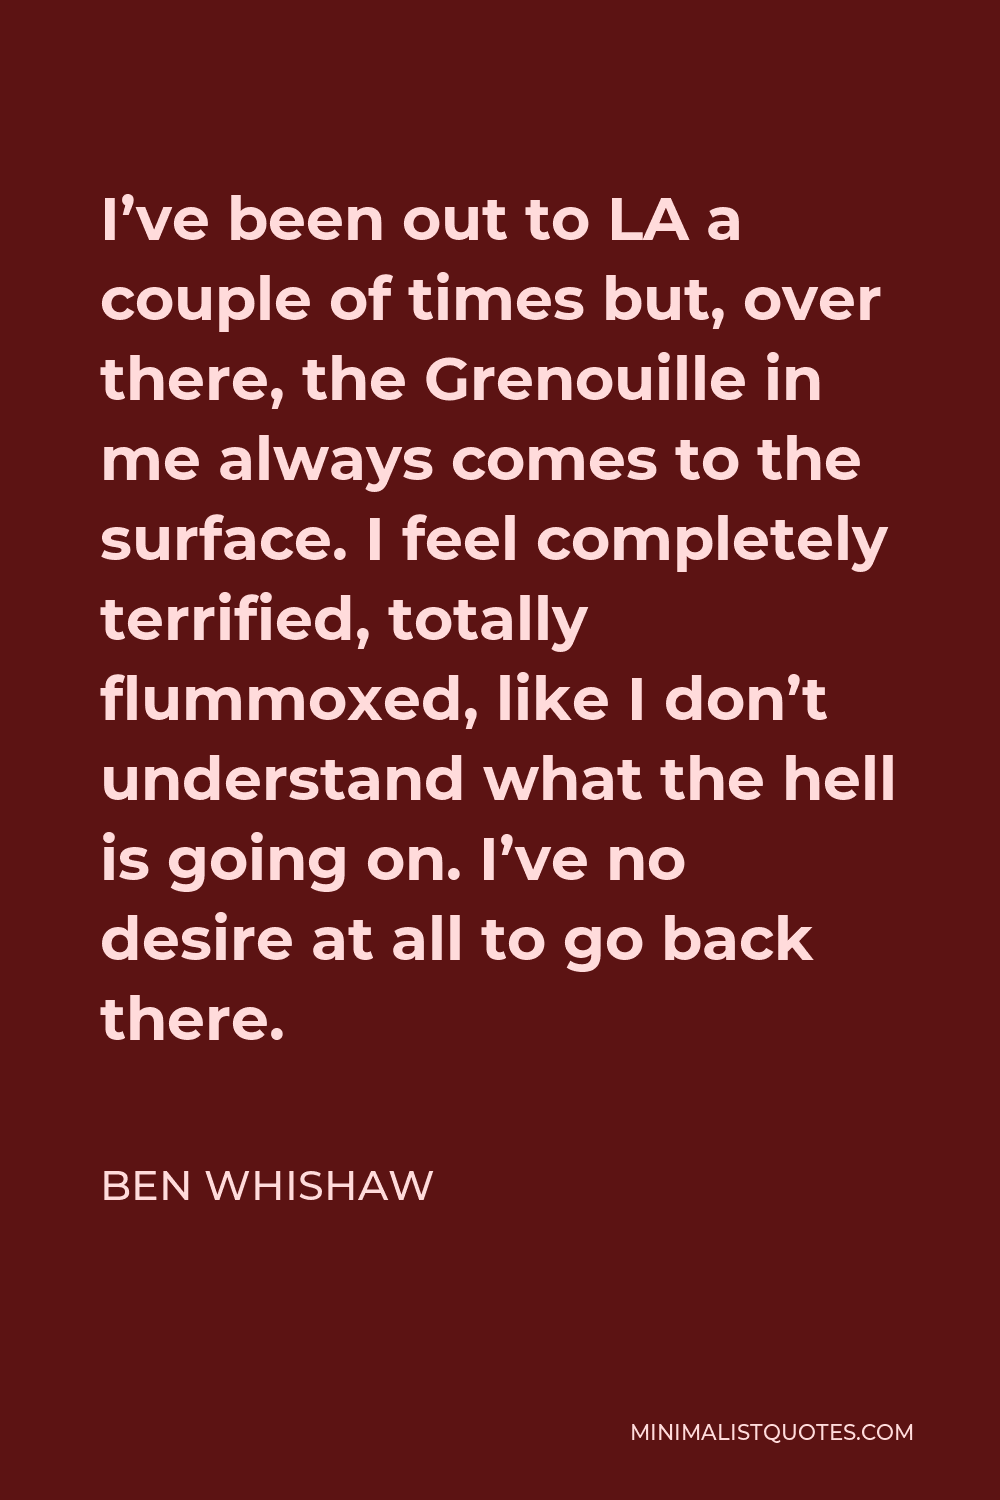 Ben Whishaw Quote - I’ve been out to LA a couple of times but, over there, the Grenouille in me always comes to the surface. I feel completely terrified, totally flummoxed, like I don’t understand what the hell is going on. I’ve no desire at all to go back there.